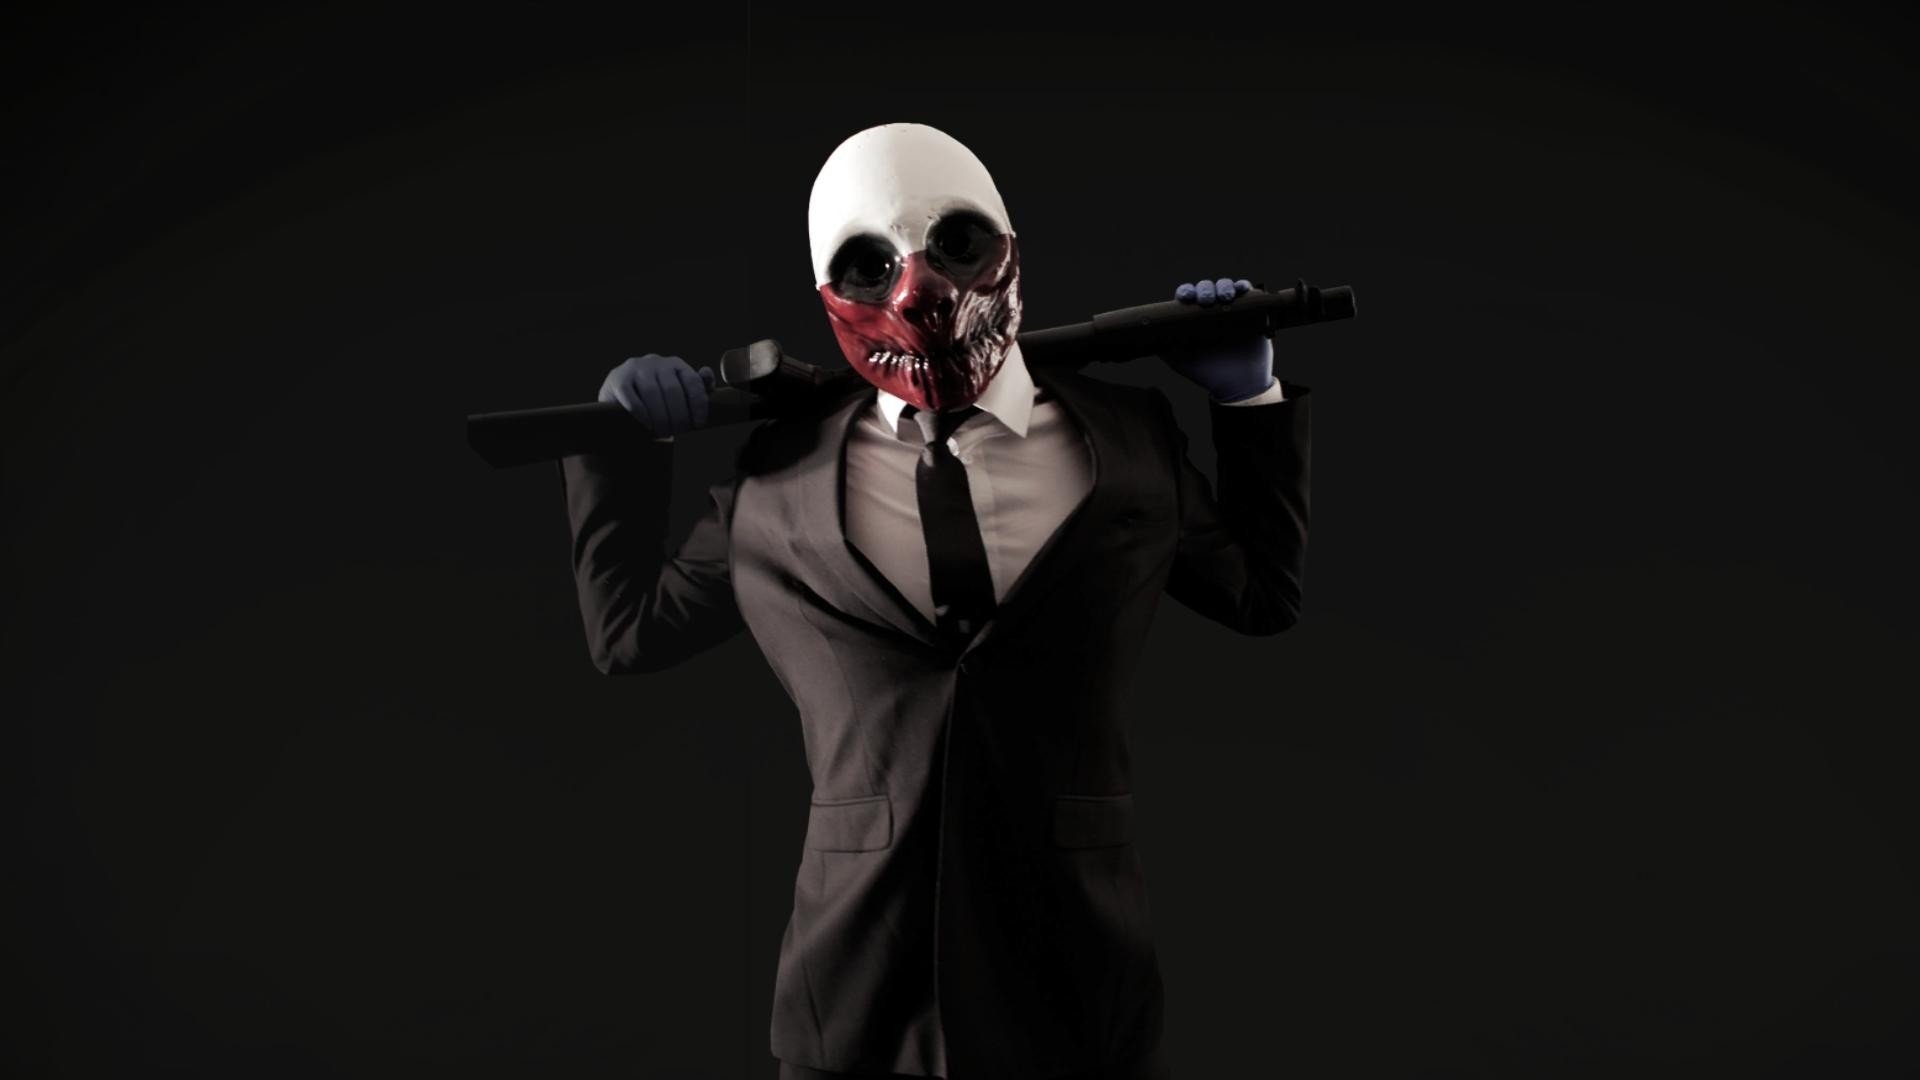 download free payday 2 pc